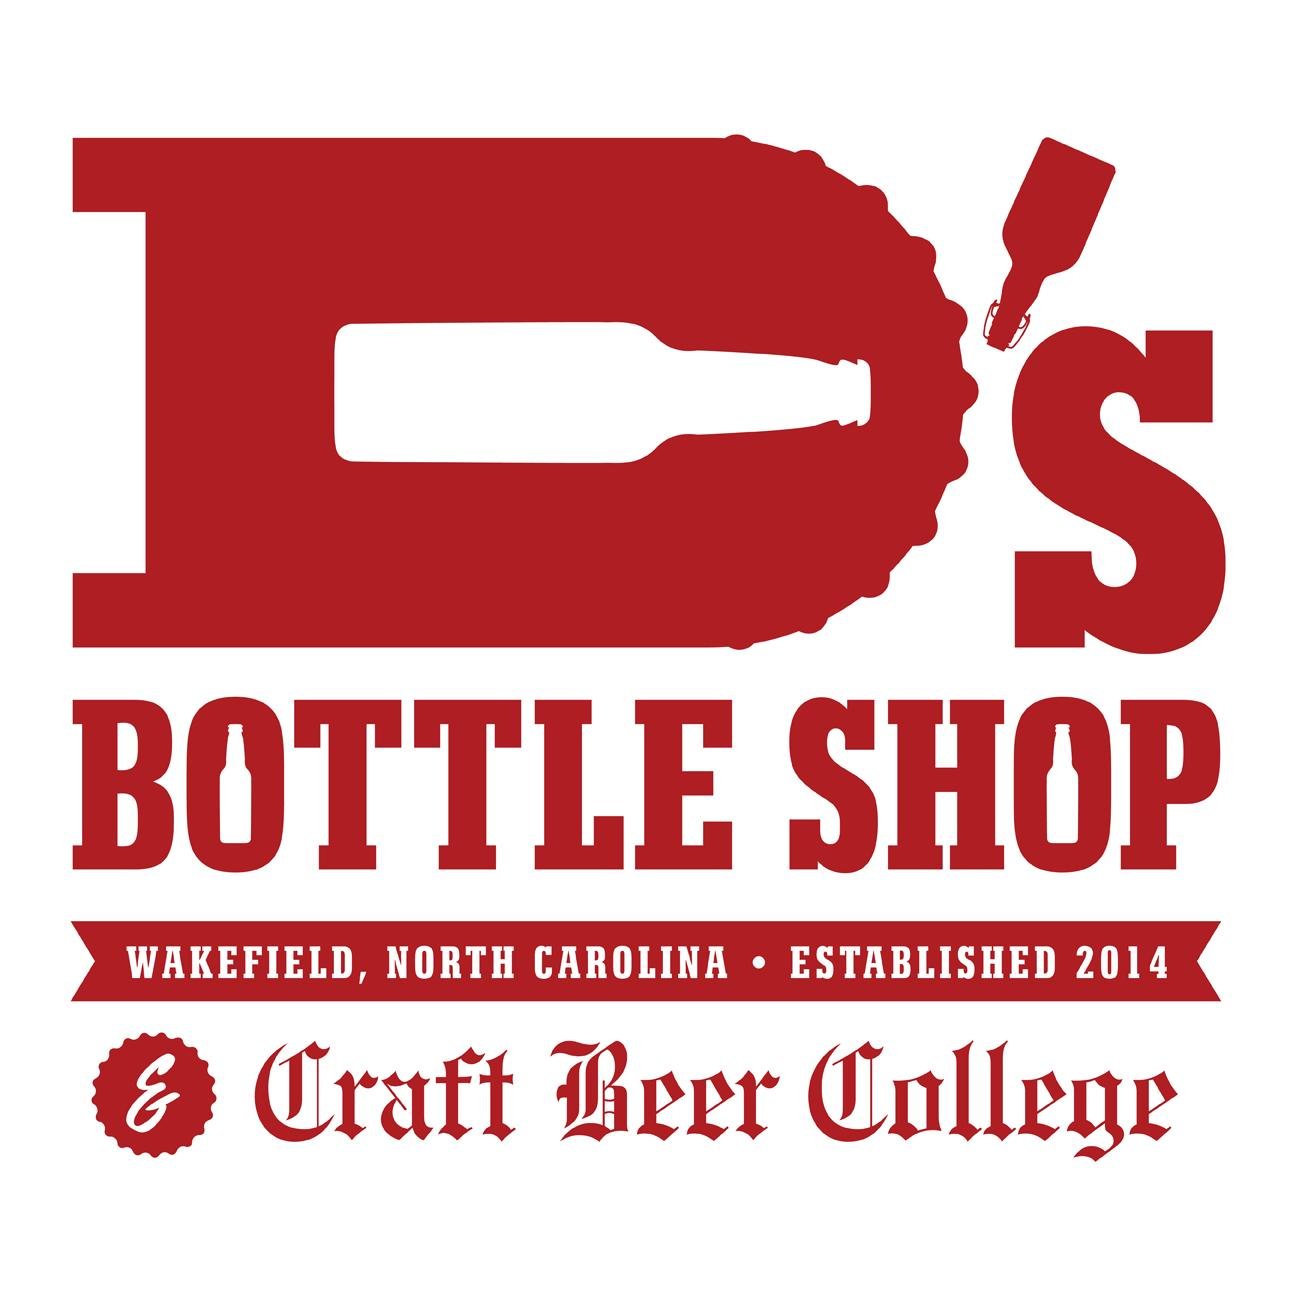 Bottle Shop and Craft Beer College